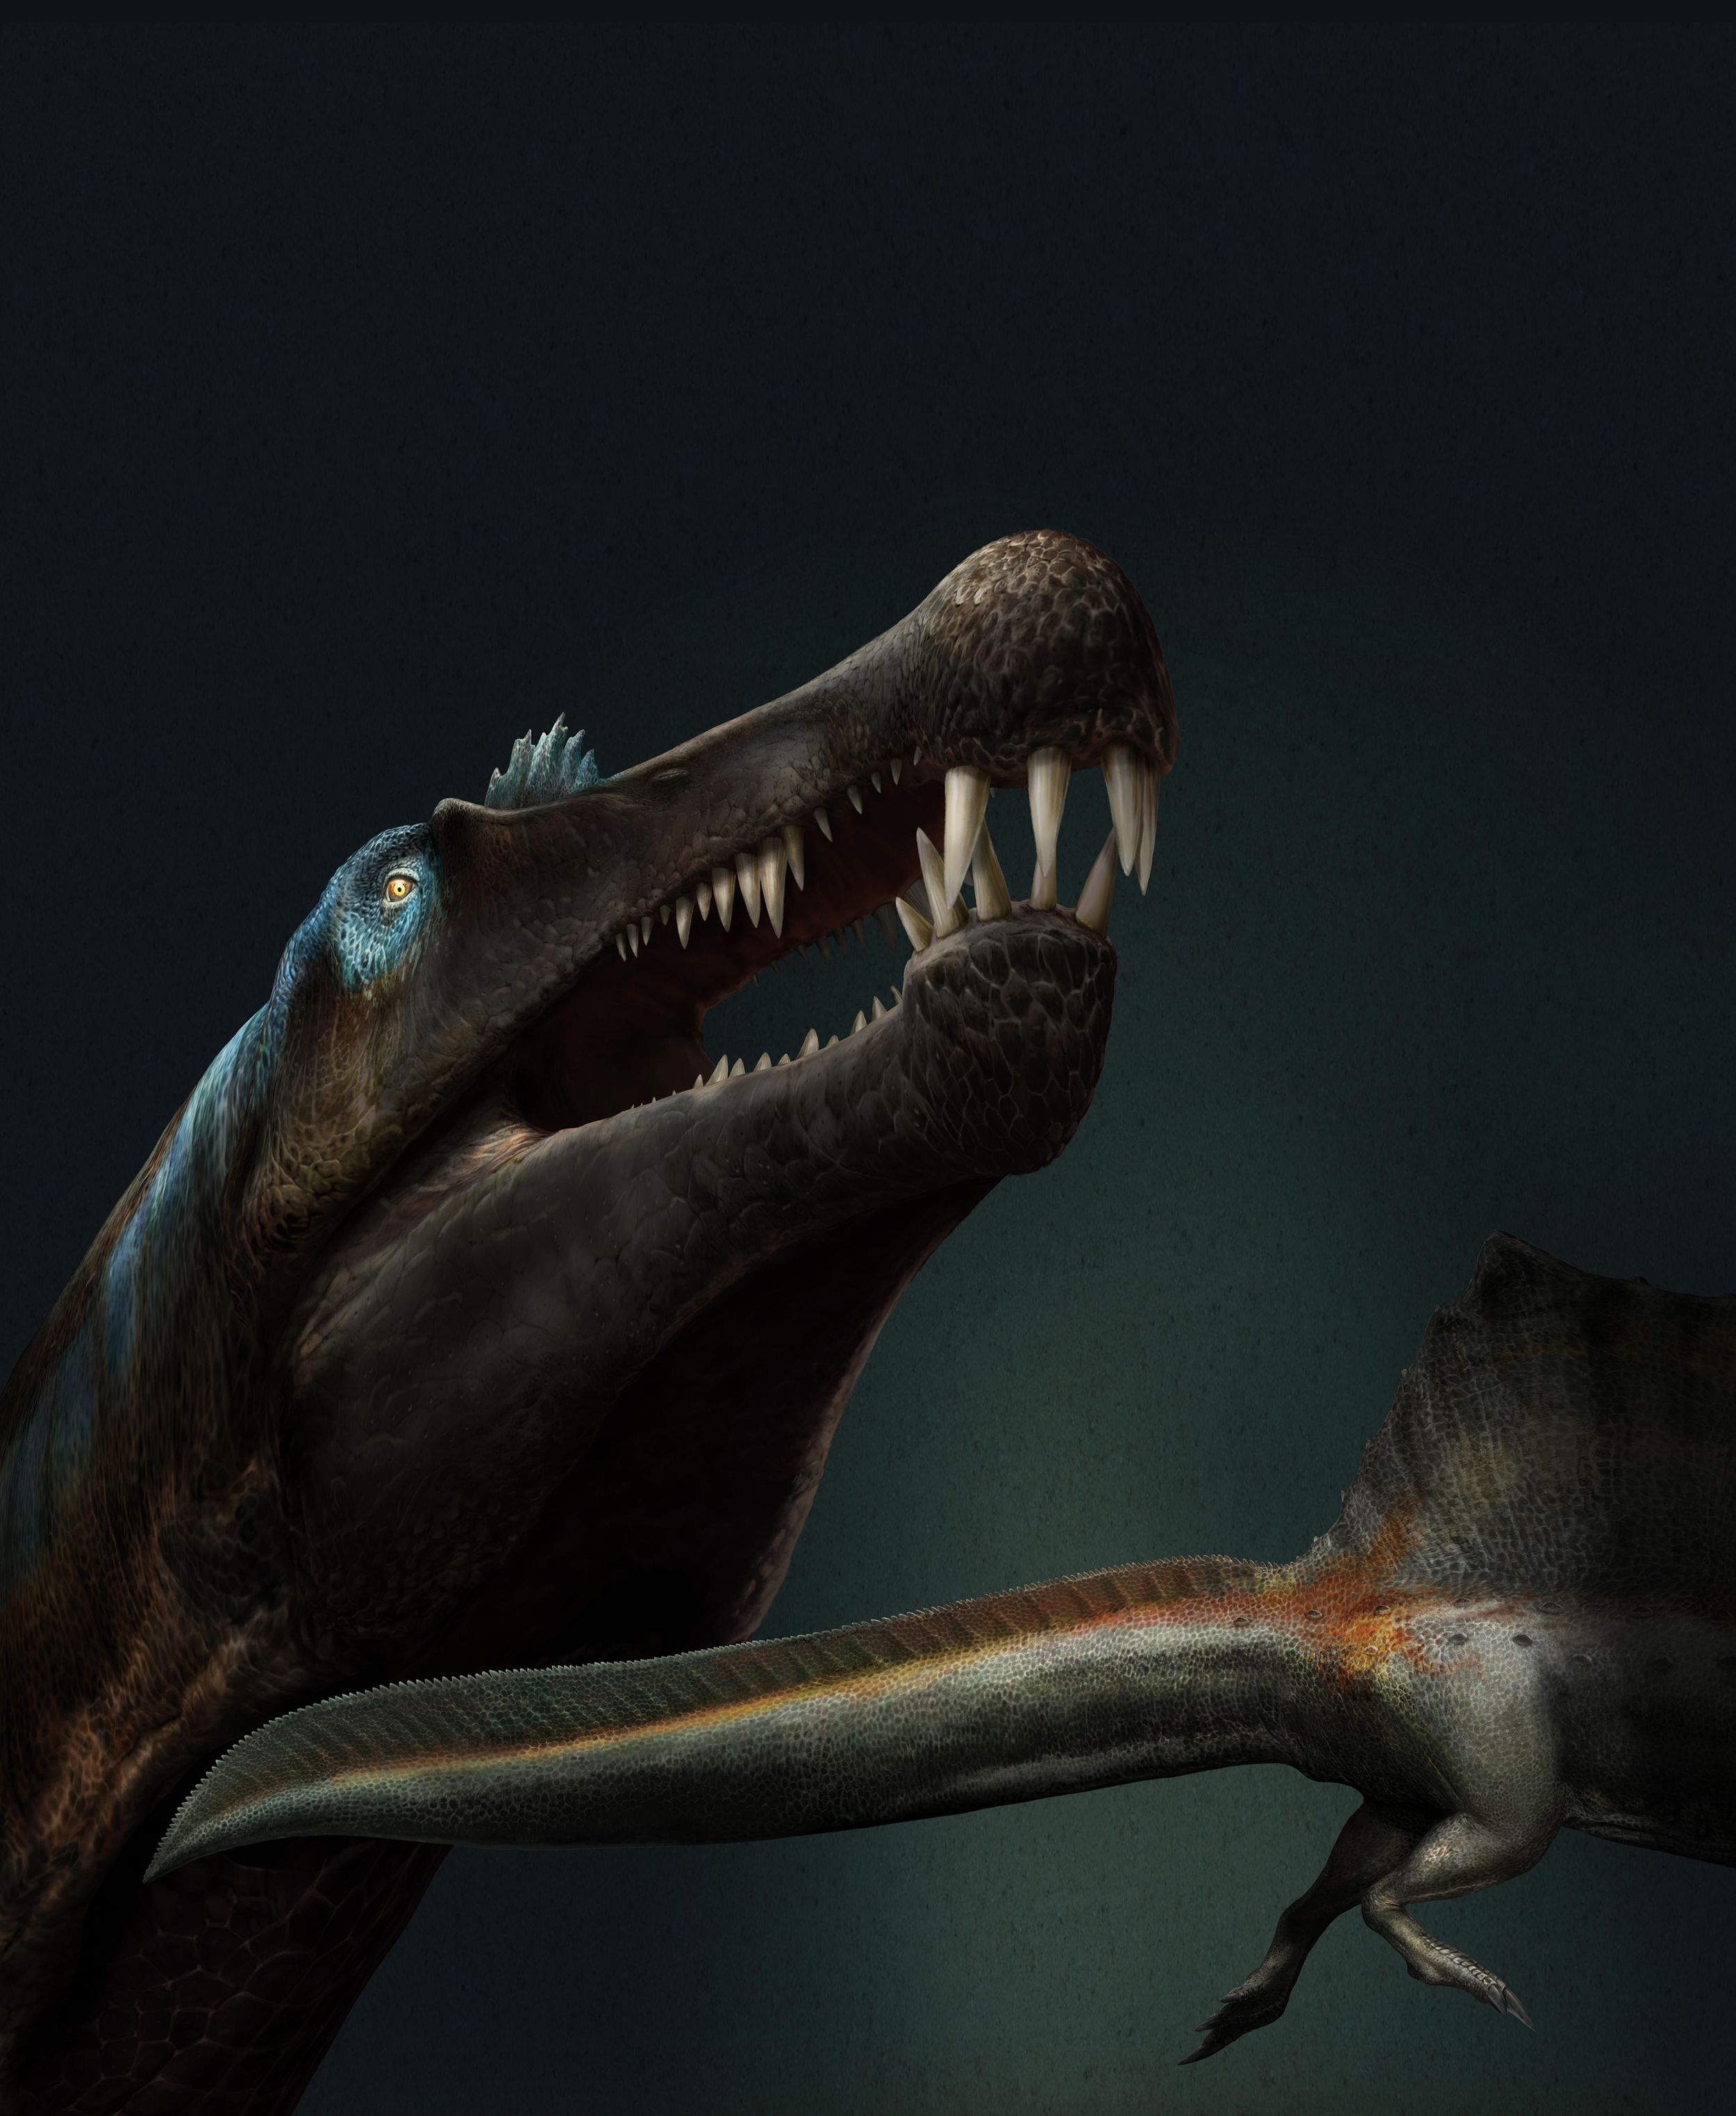 What Was the Most Dangerous Carnivorous Dinosaur?